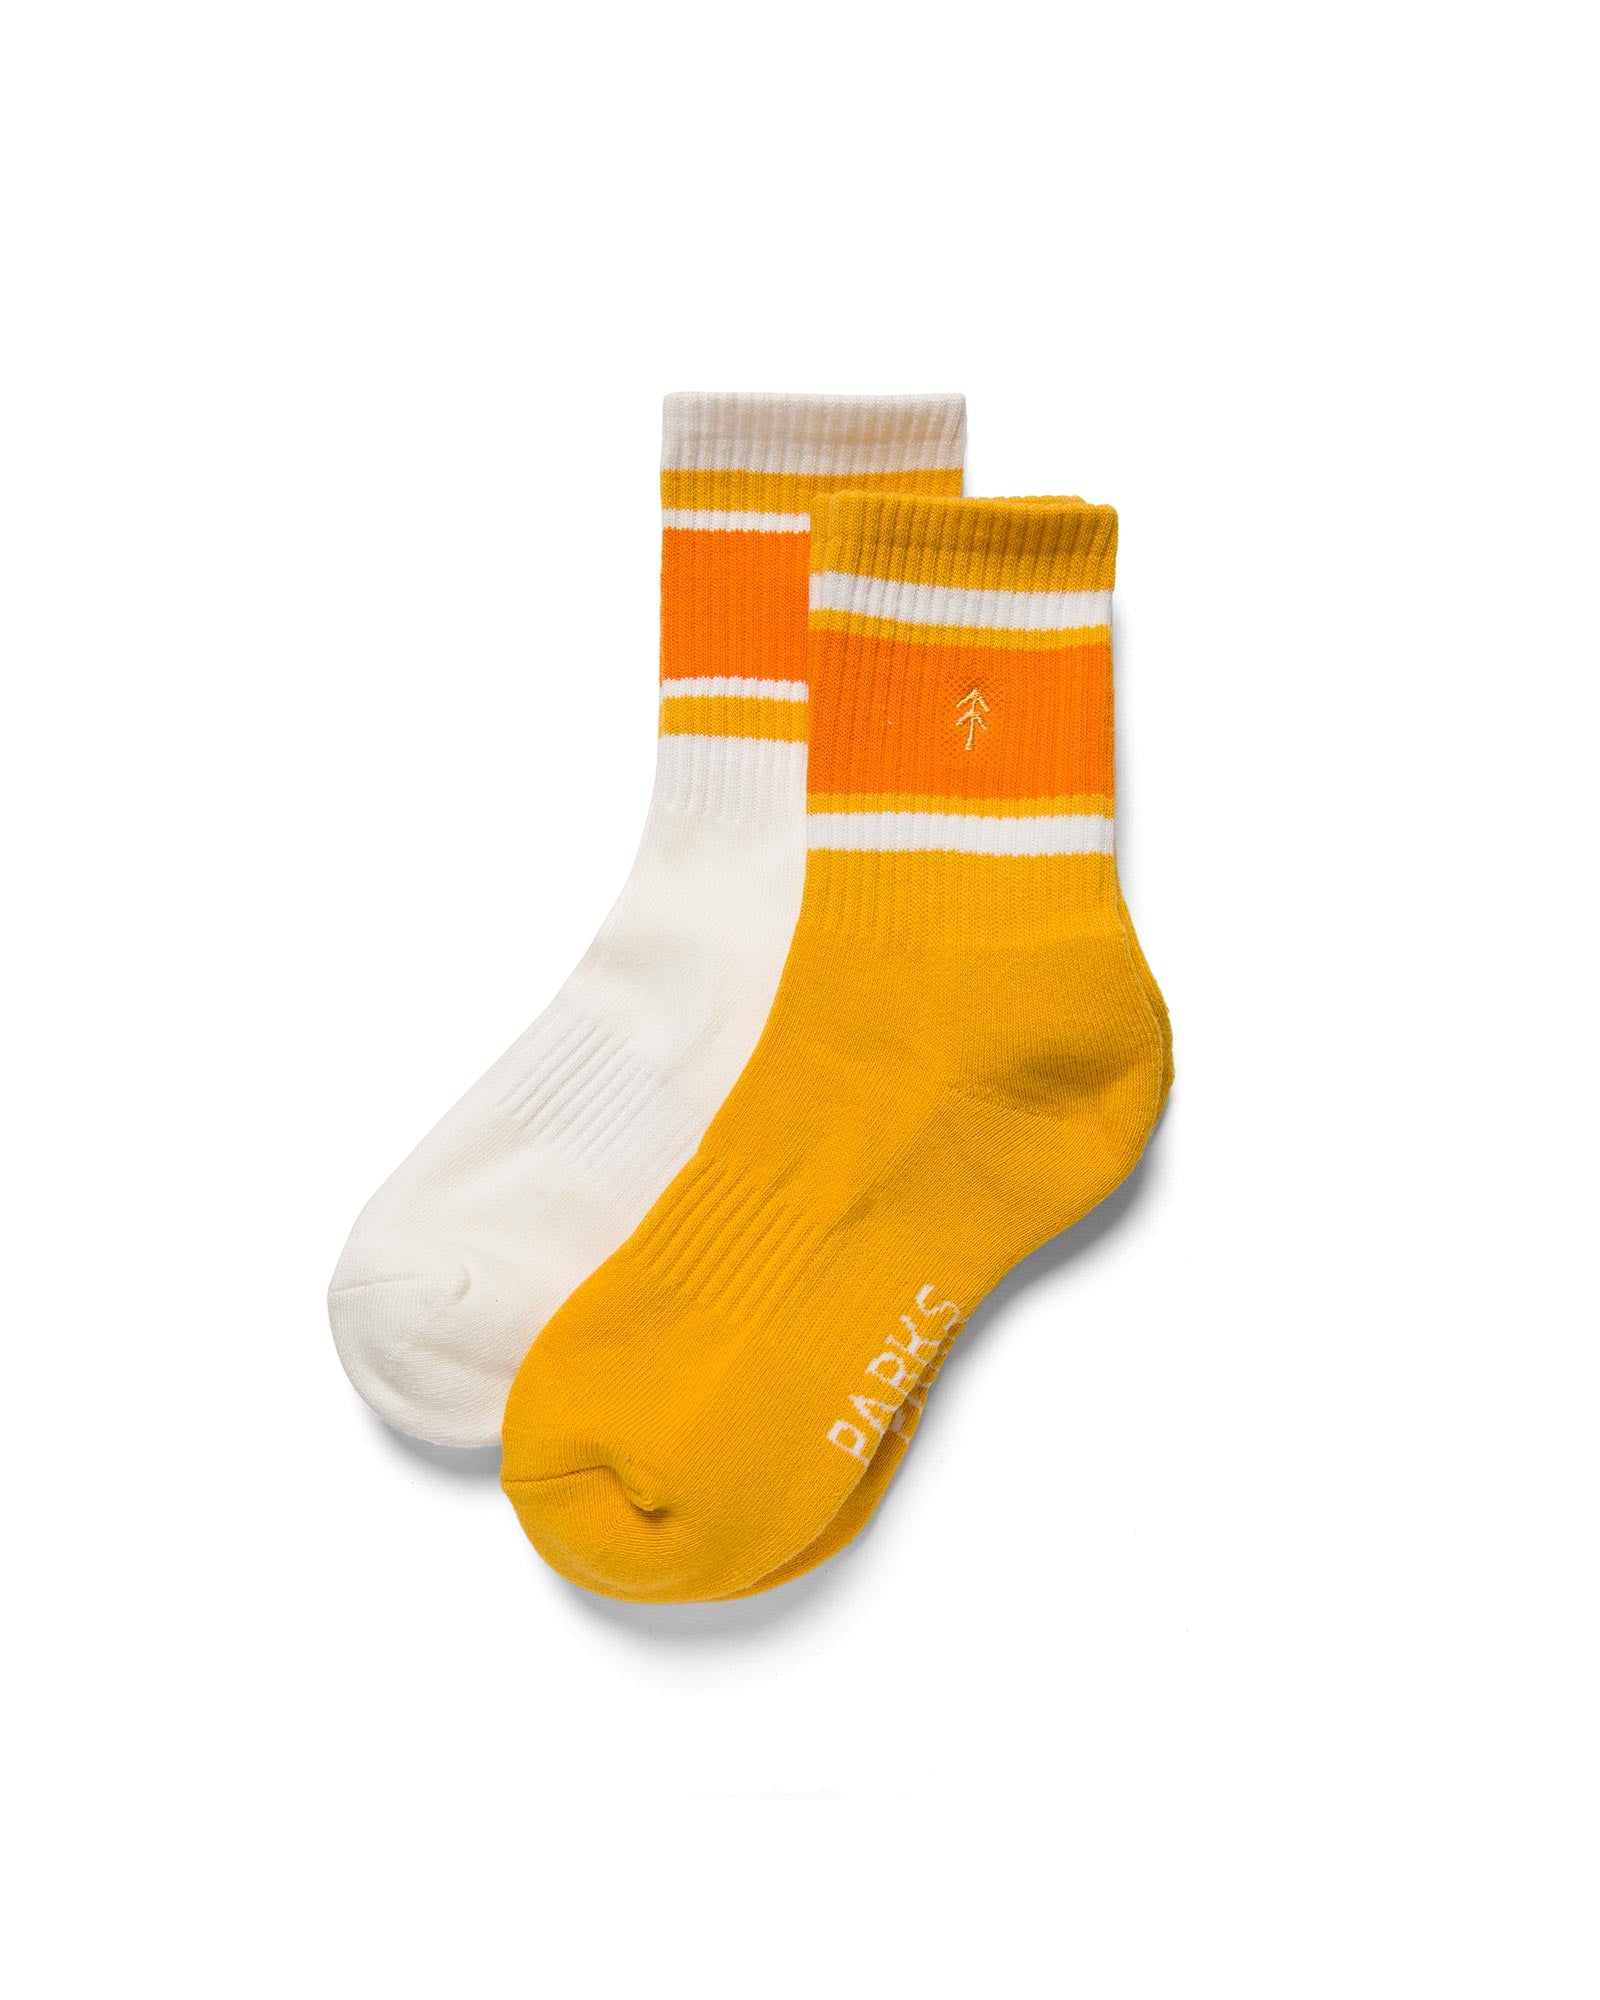 Shop Trail Crew Tube Socks 2 pack Inspired By National Parks – Parks Project